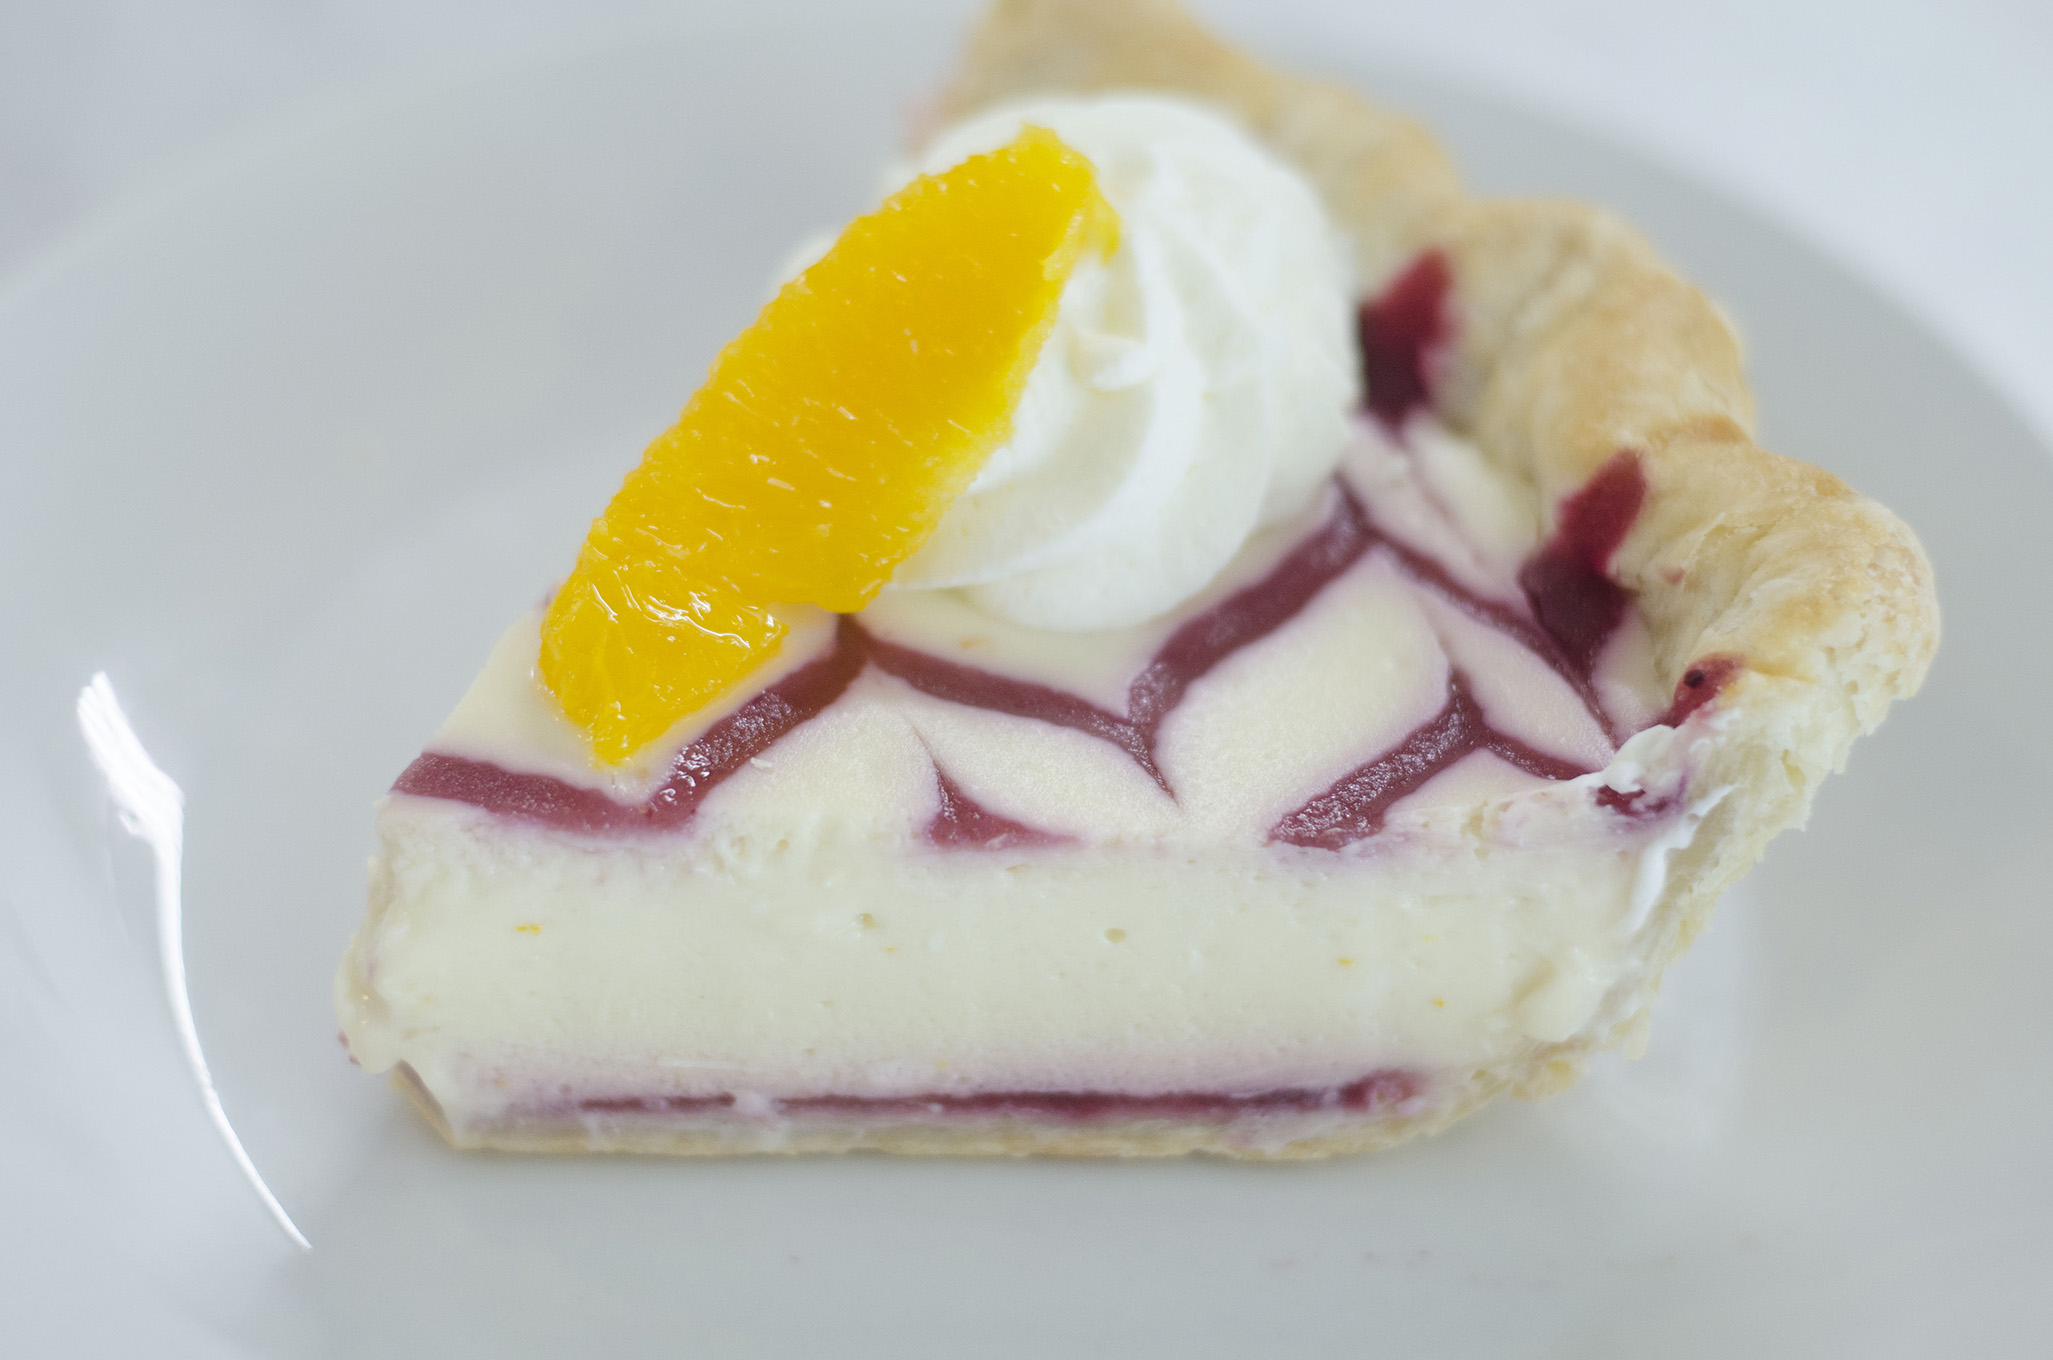 Cranberry Orange Cheesecake from Riverside Pie Cafe in Windsor, Ontario.